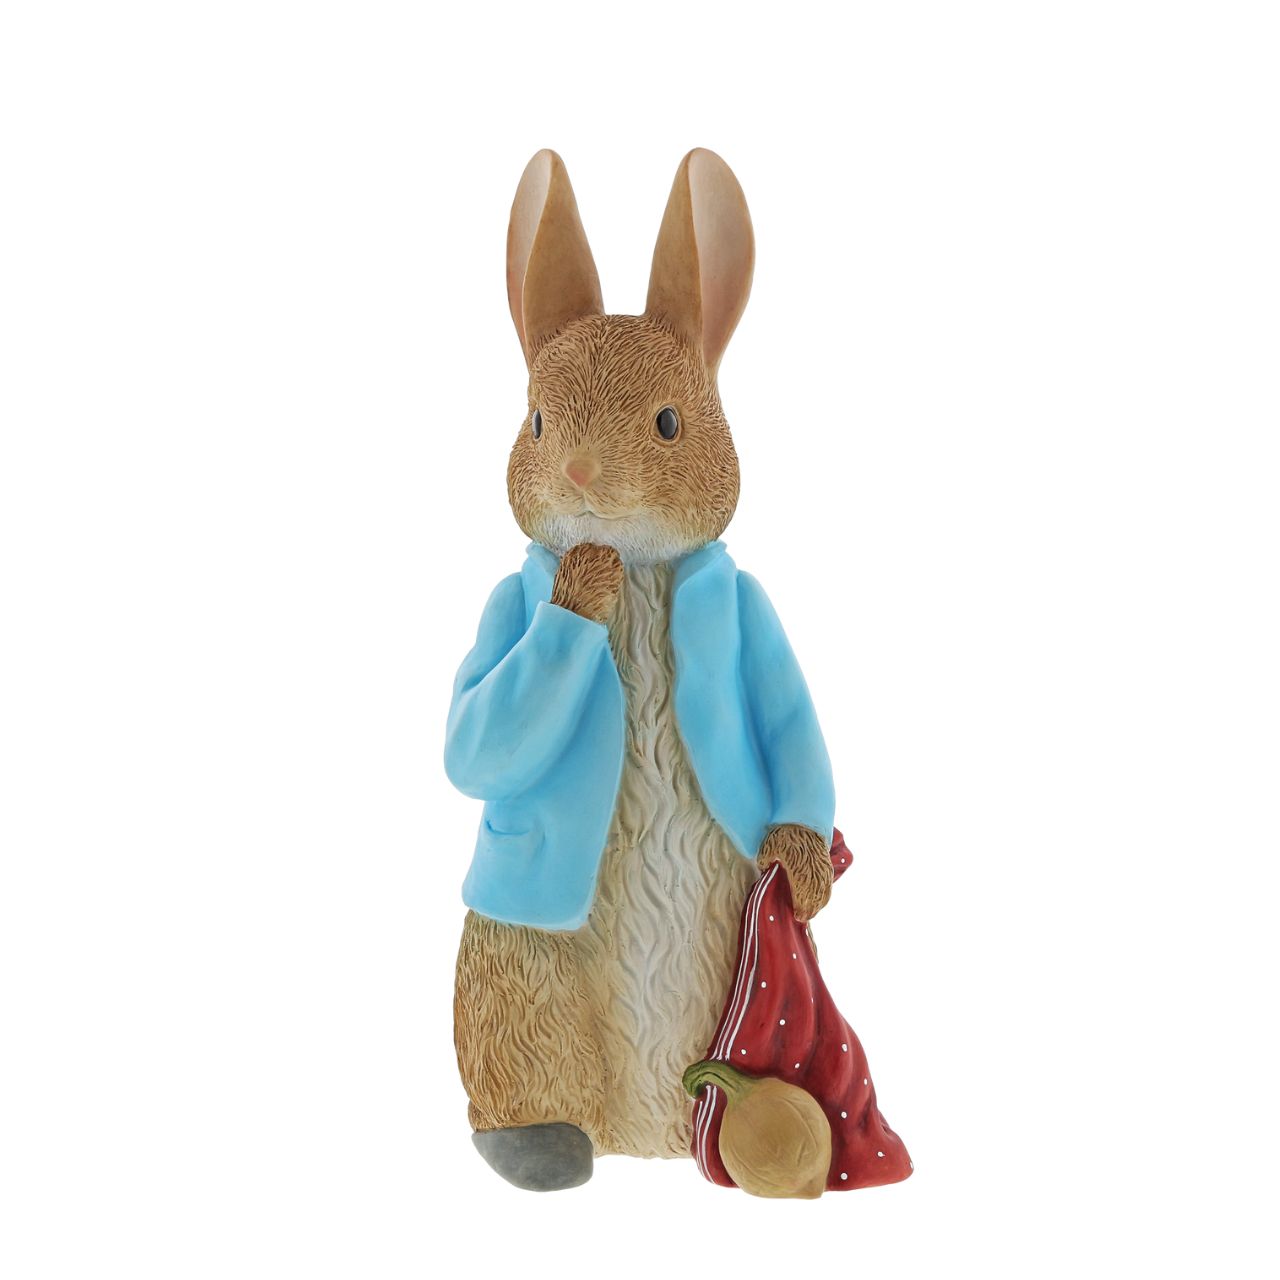 Big, bold and perfectly delightful is this Peter Rabbit Statement figurine. Standing 35.0cm tall, this figurine is sure to make a statement around the home, office or garden. Peter has been dressed in his iconic blue jacket and have been finished with a weather proof paint, making this a stunning yet versatile piece.